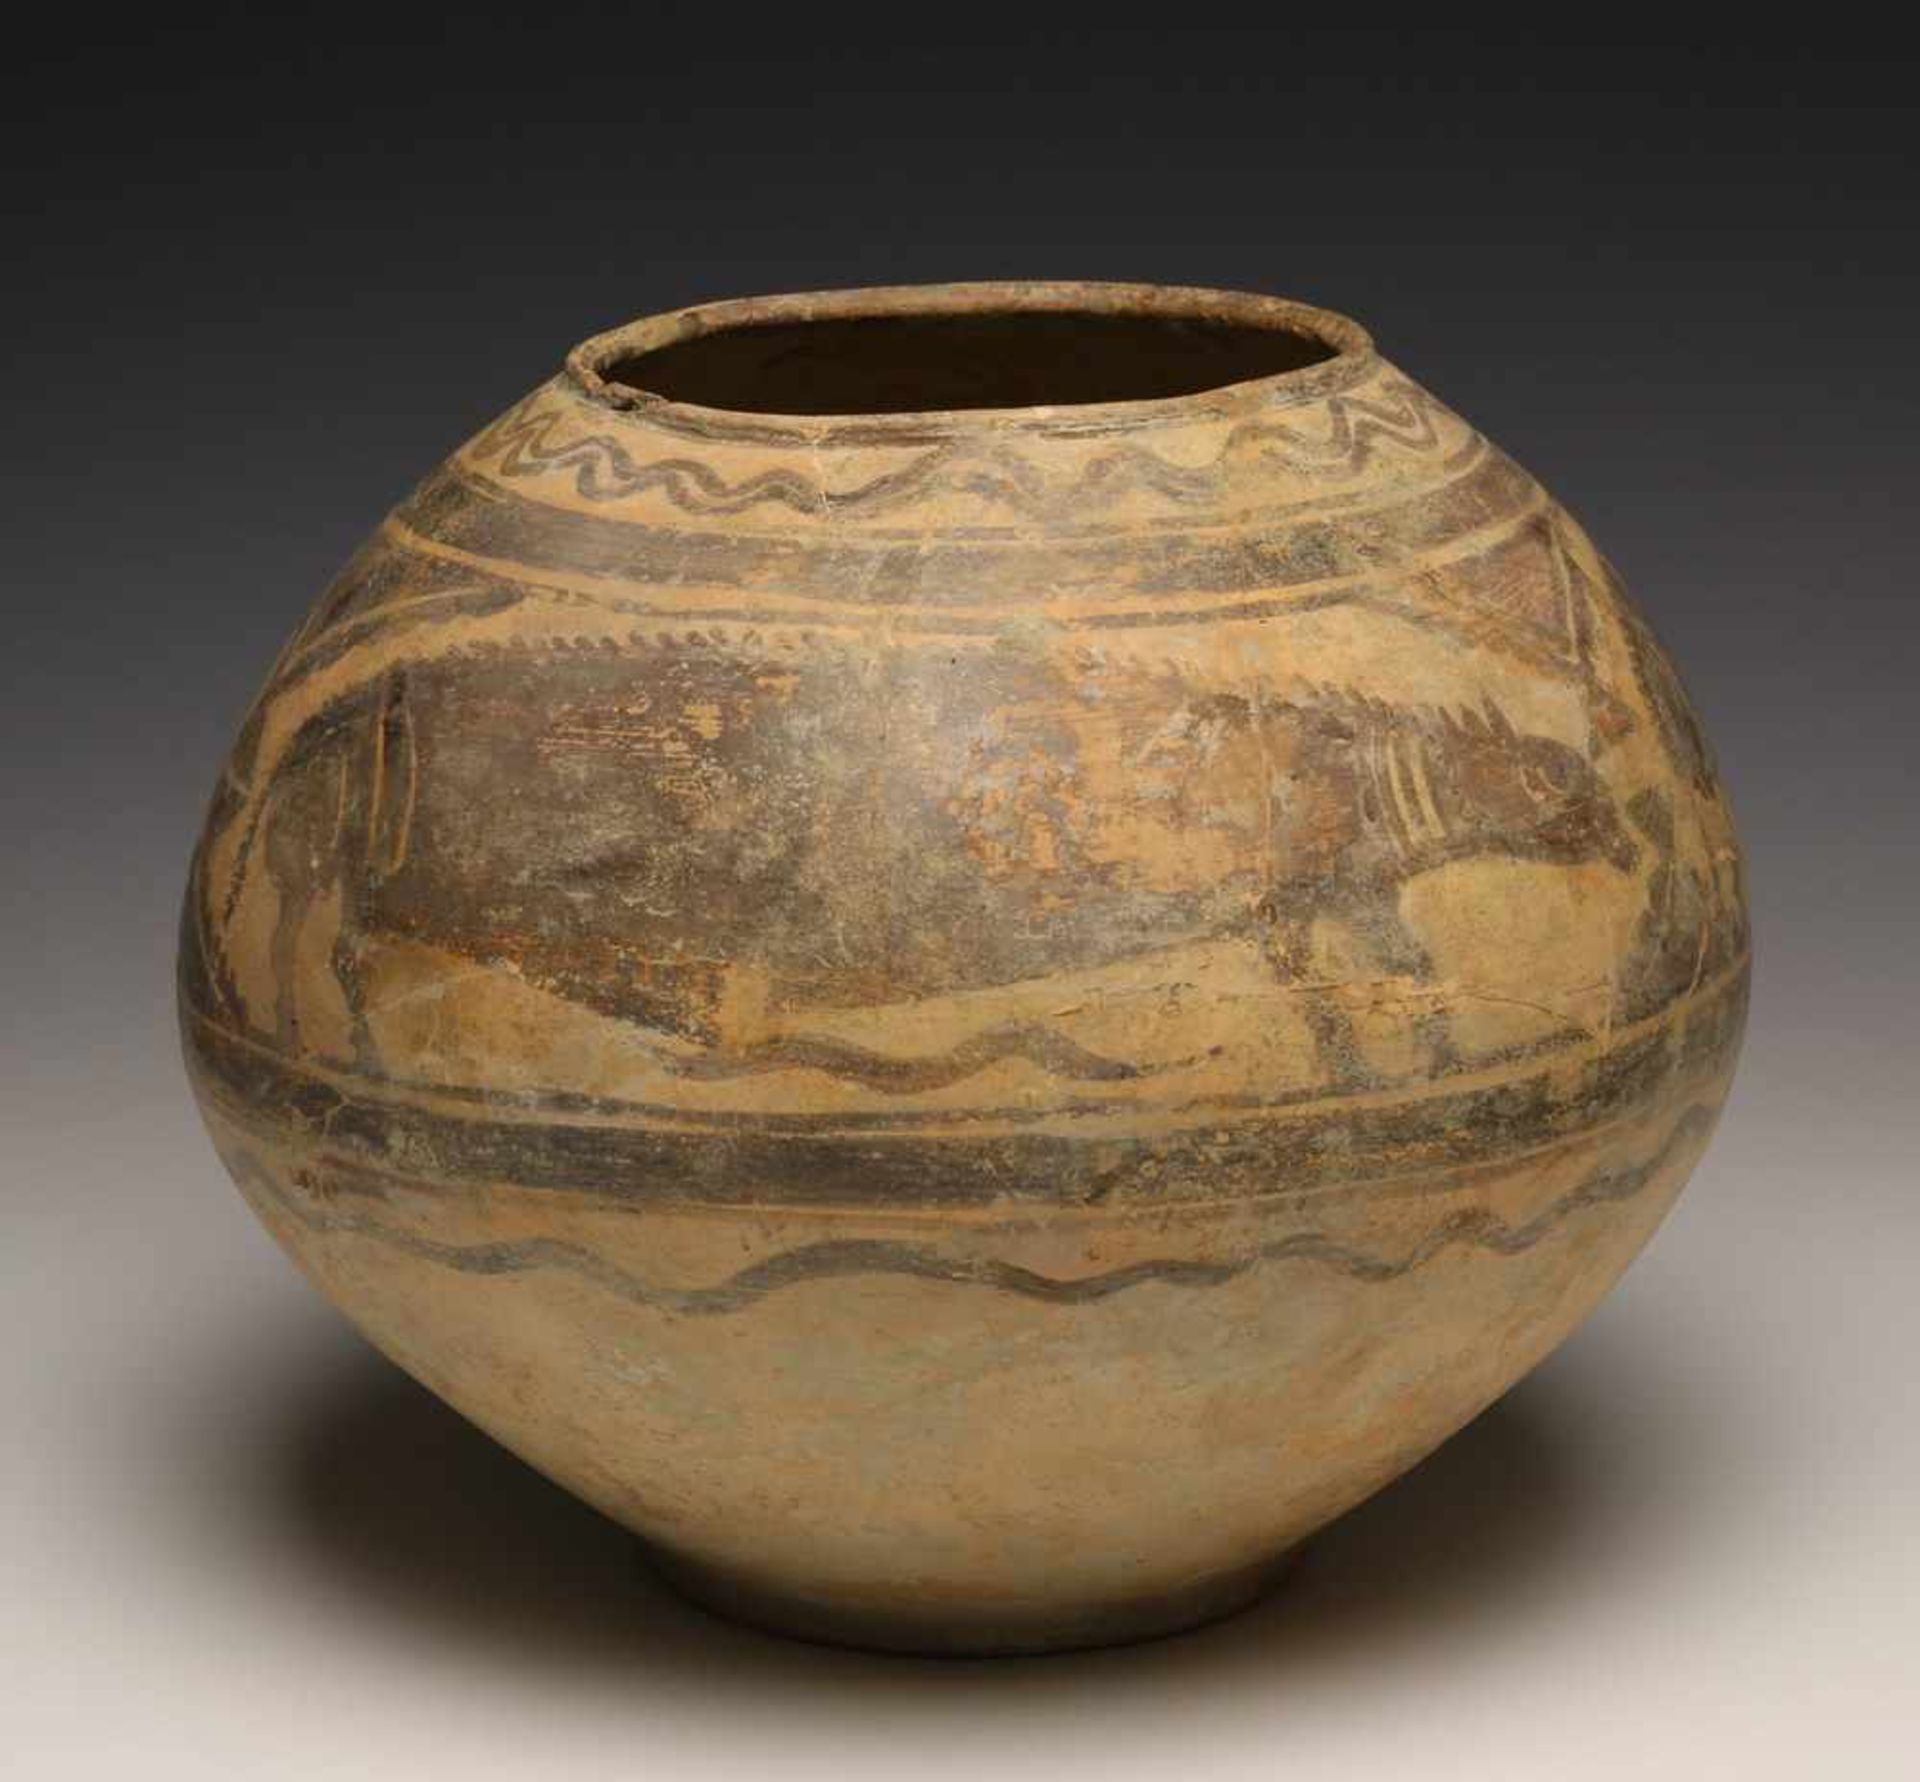 Indus Valei, Pakistan, Mehrgarh, 3000-2400 BC., terracotta vasepainted with three images of a